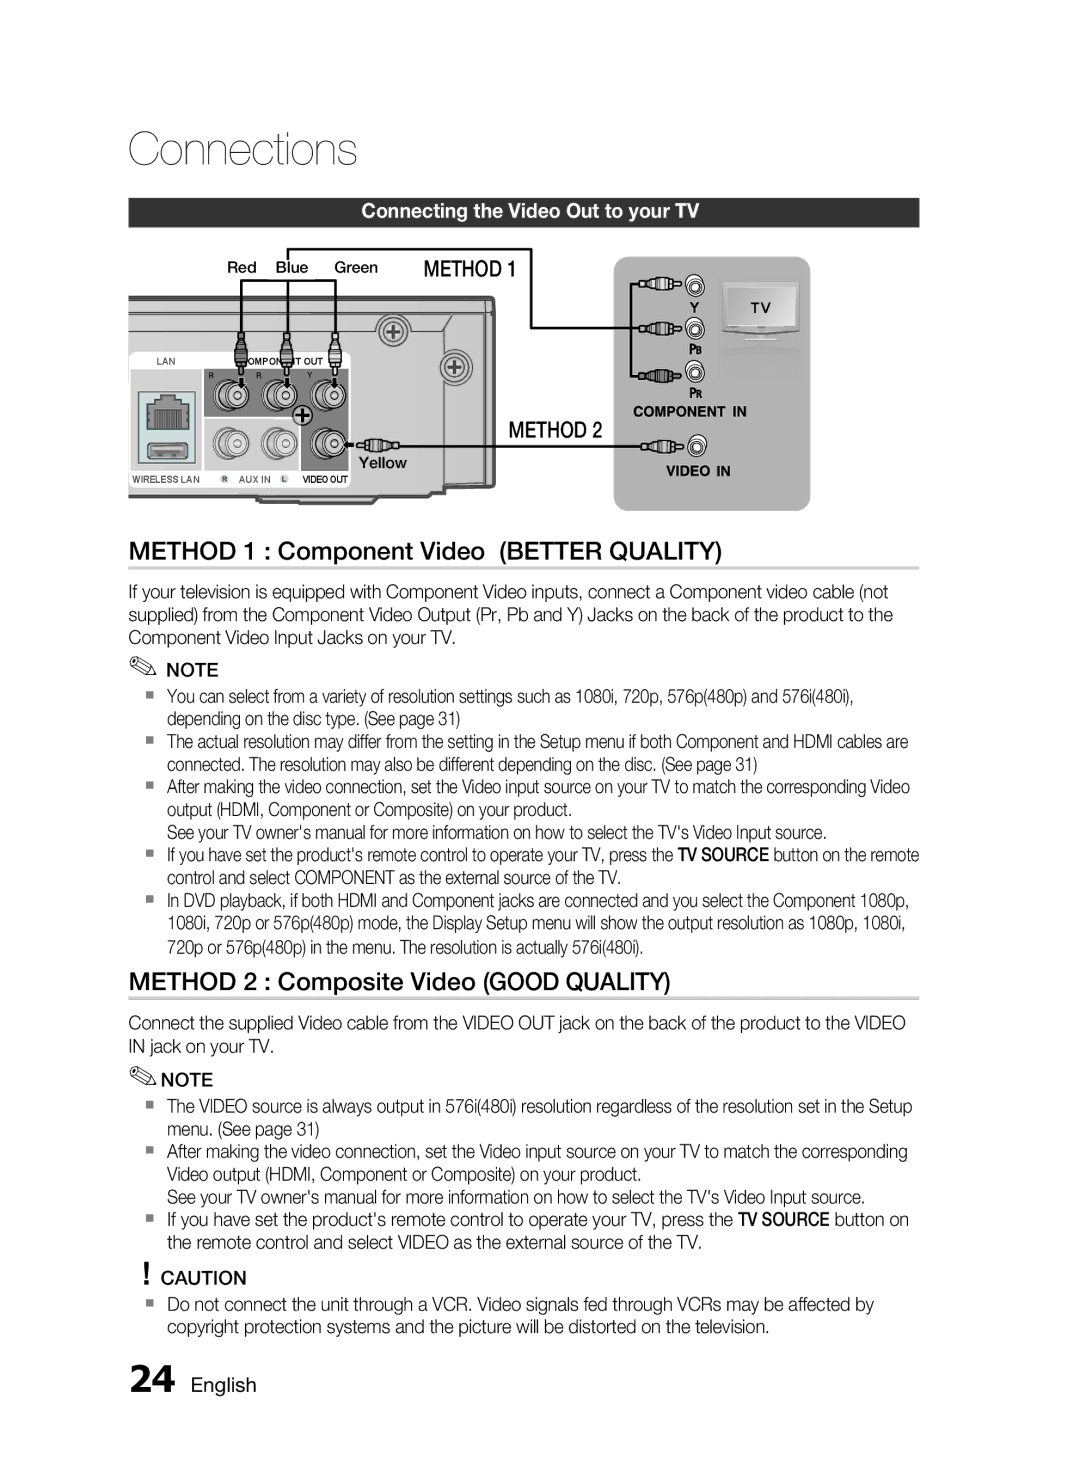 Samsung HT-C5550 user manual Method 1 Component Video Better Quality, Method 2 Composite Video Good Quality 